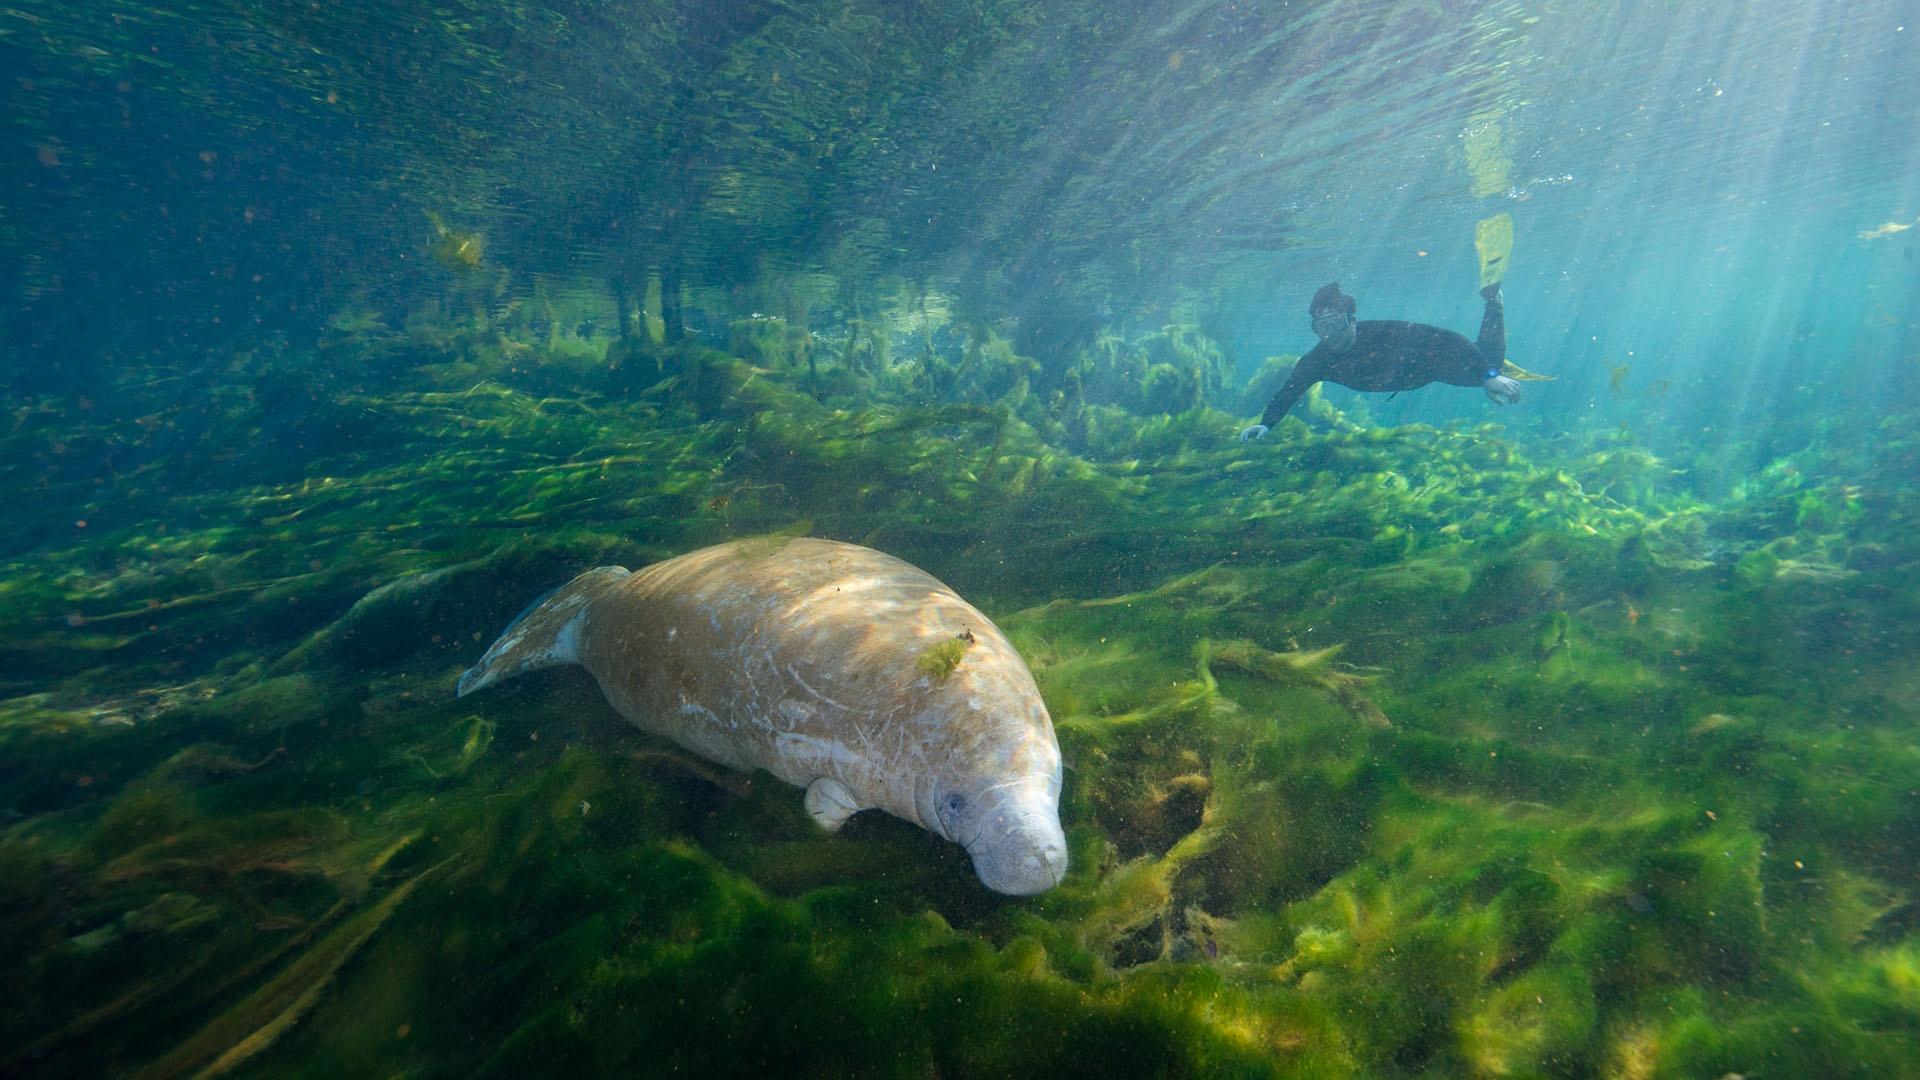 Joe Guthrie swims over a manatee in an algae-filled freshwater spring in Florida.